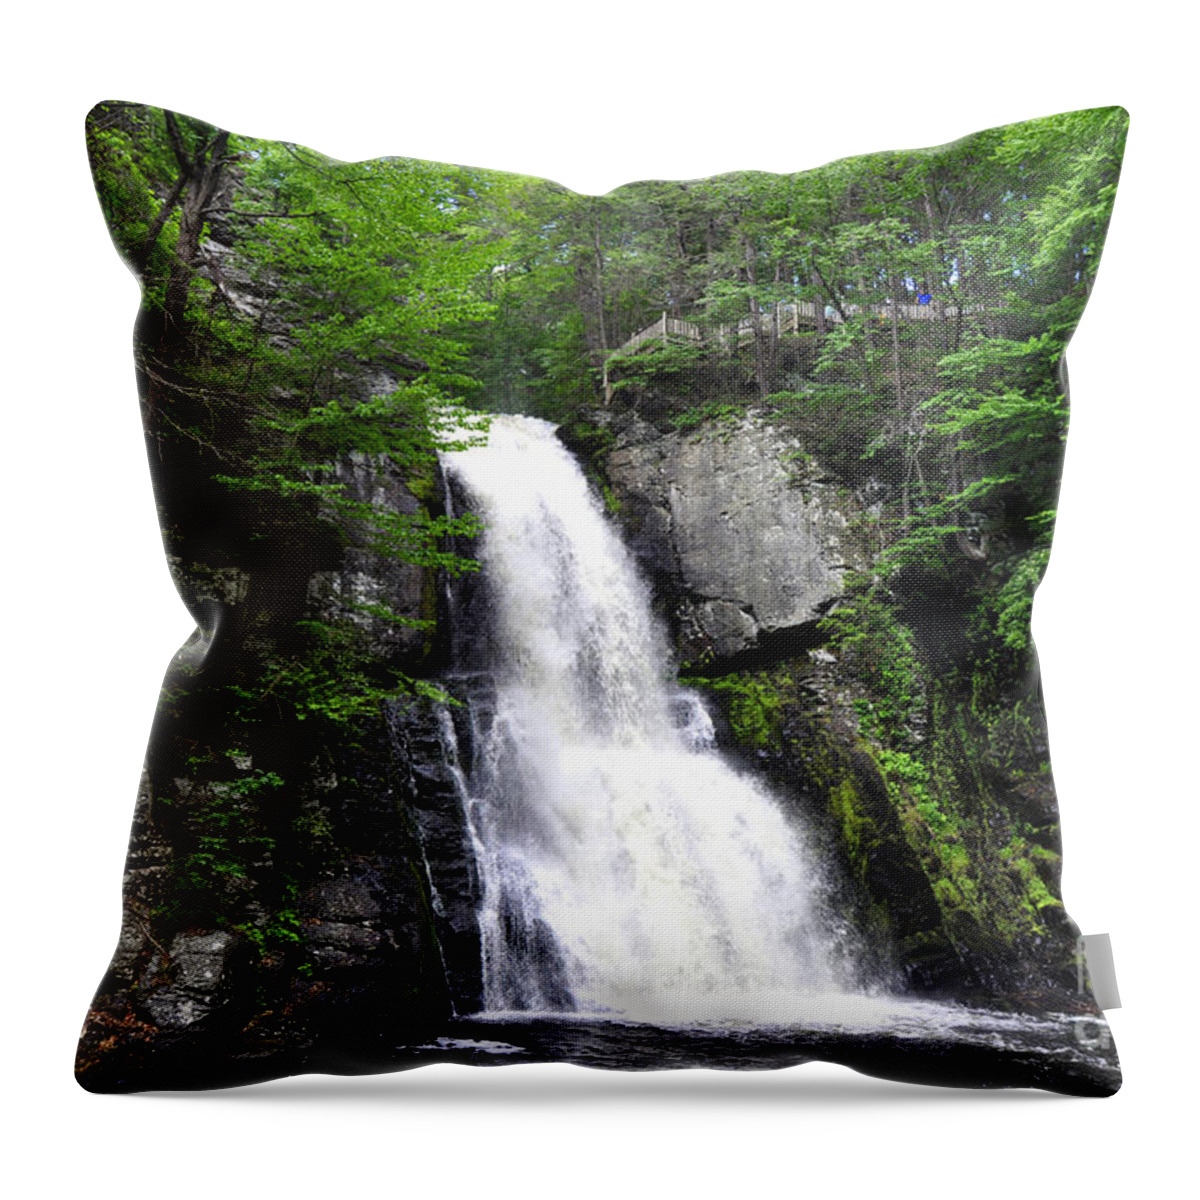 Bushkill Falls Throw Pillow featuring the photograph Bushkill Fall - Five by Andrew Dinh